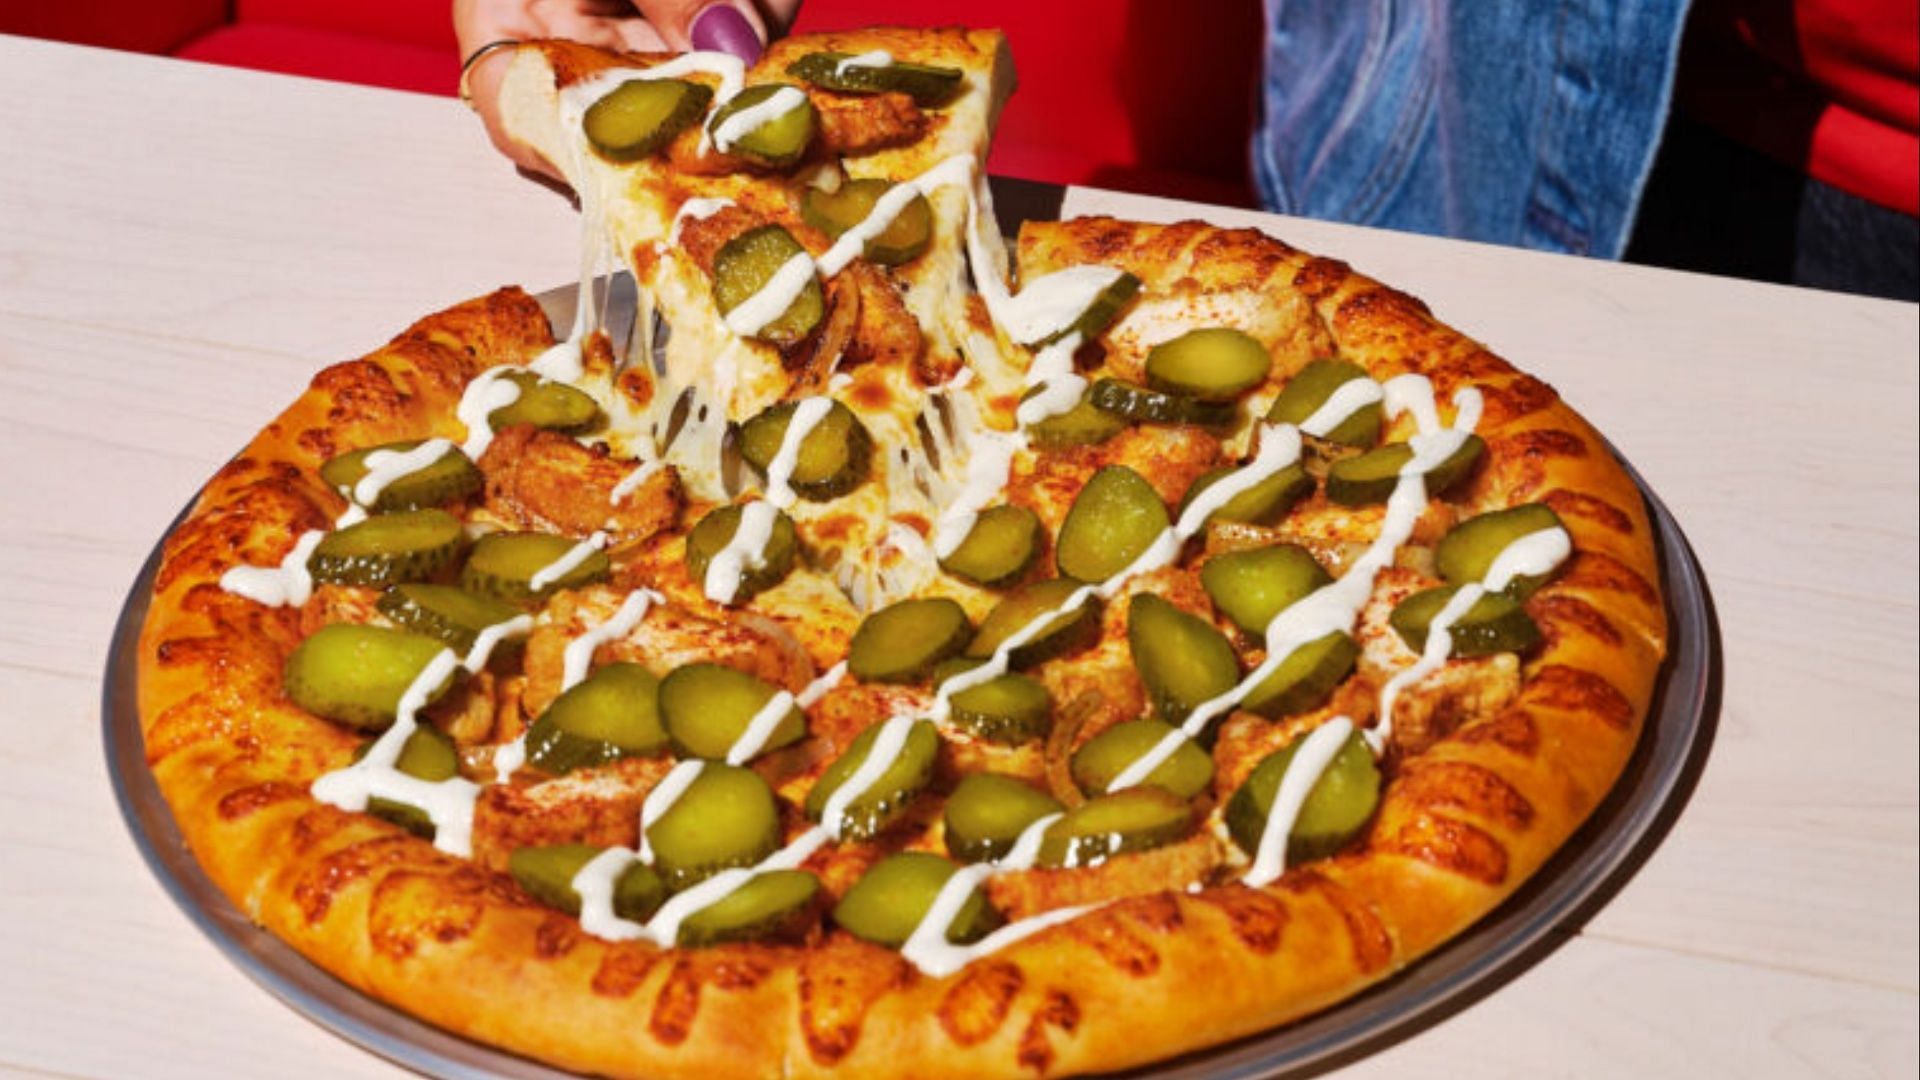 Pizza Hut Pickle Pizza: Ingredients, price, availability, and other ...